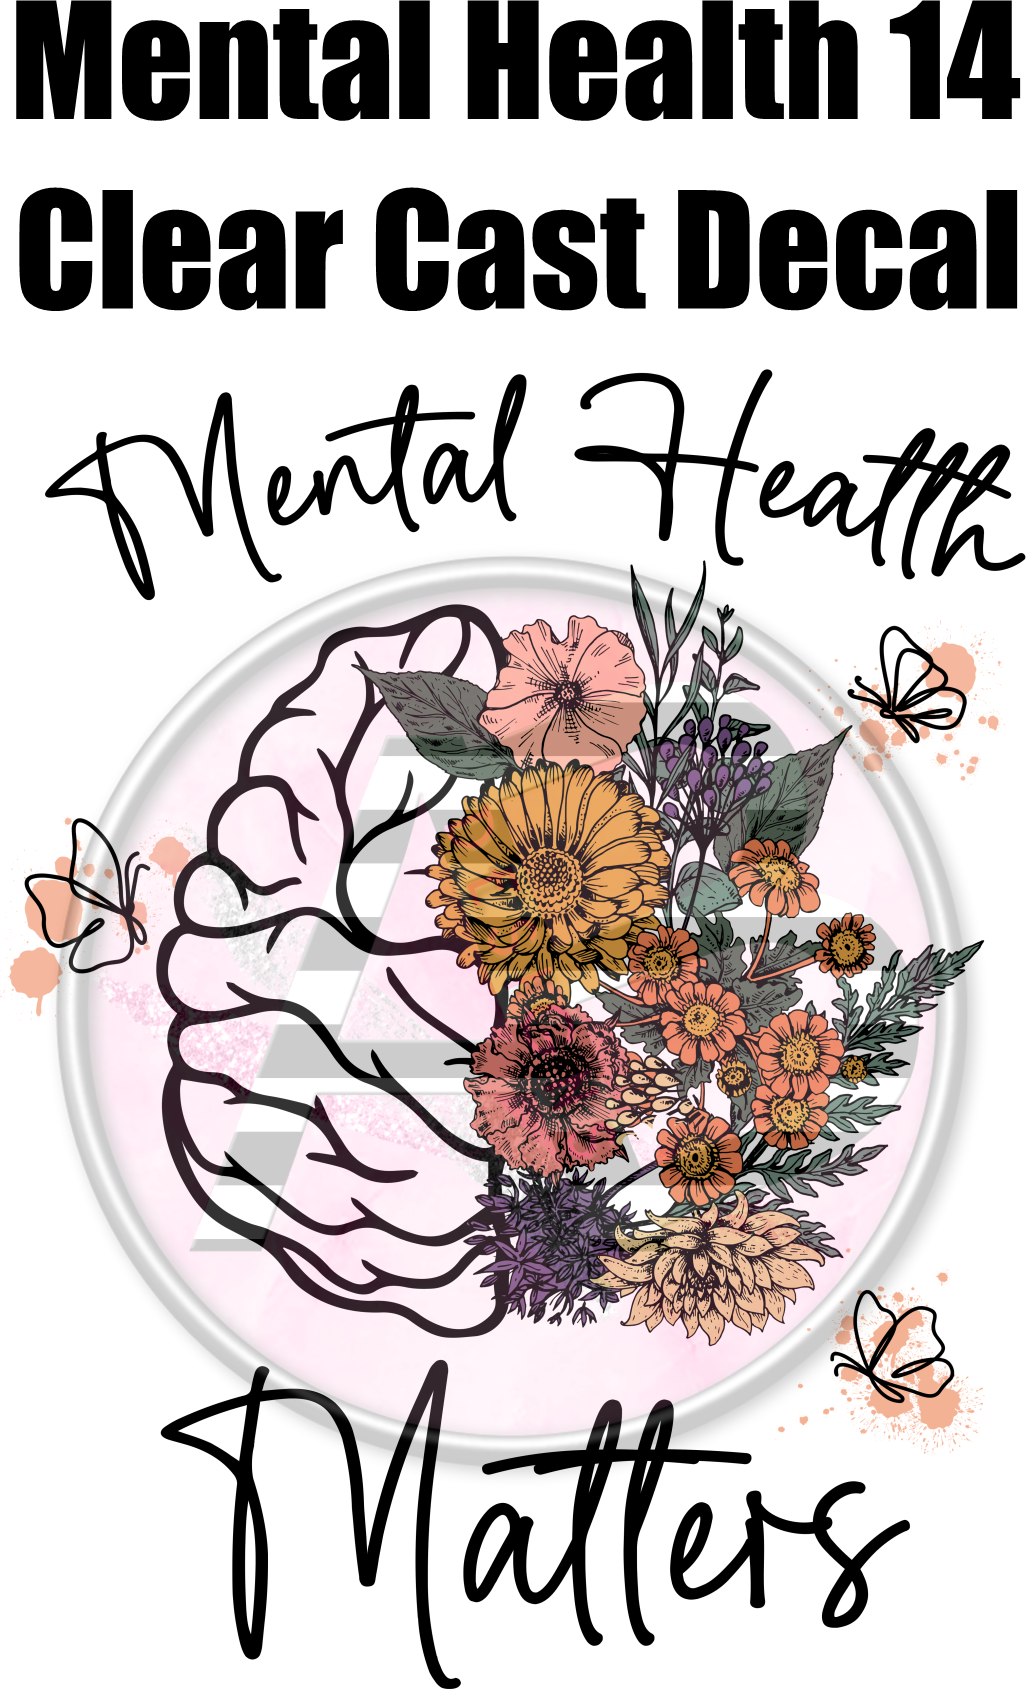 Mental Health 14 - Clear Cast Decal